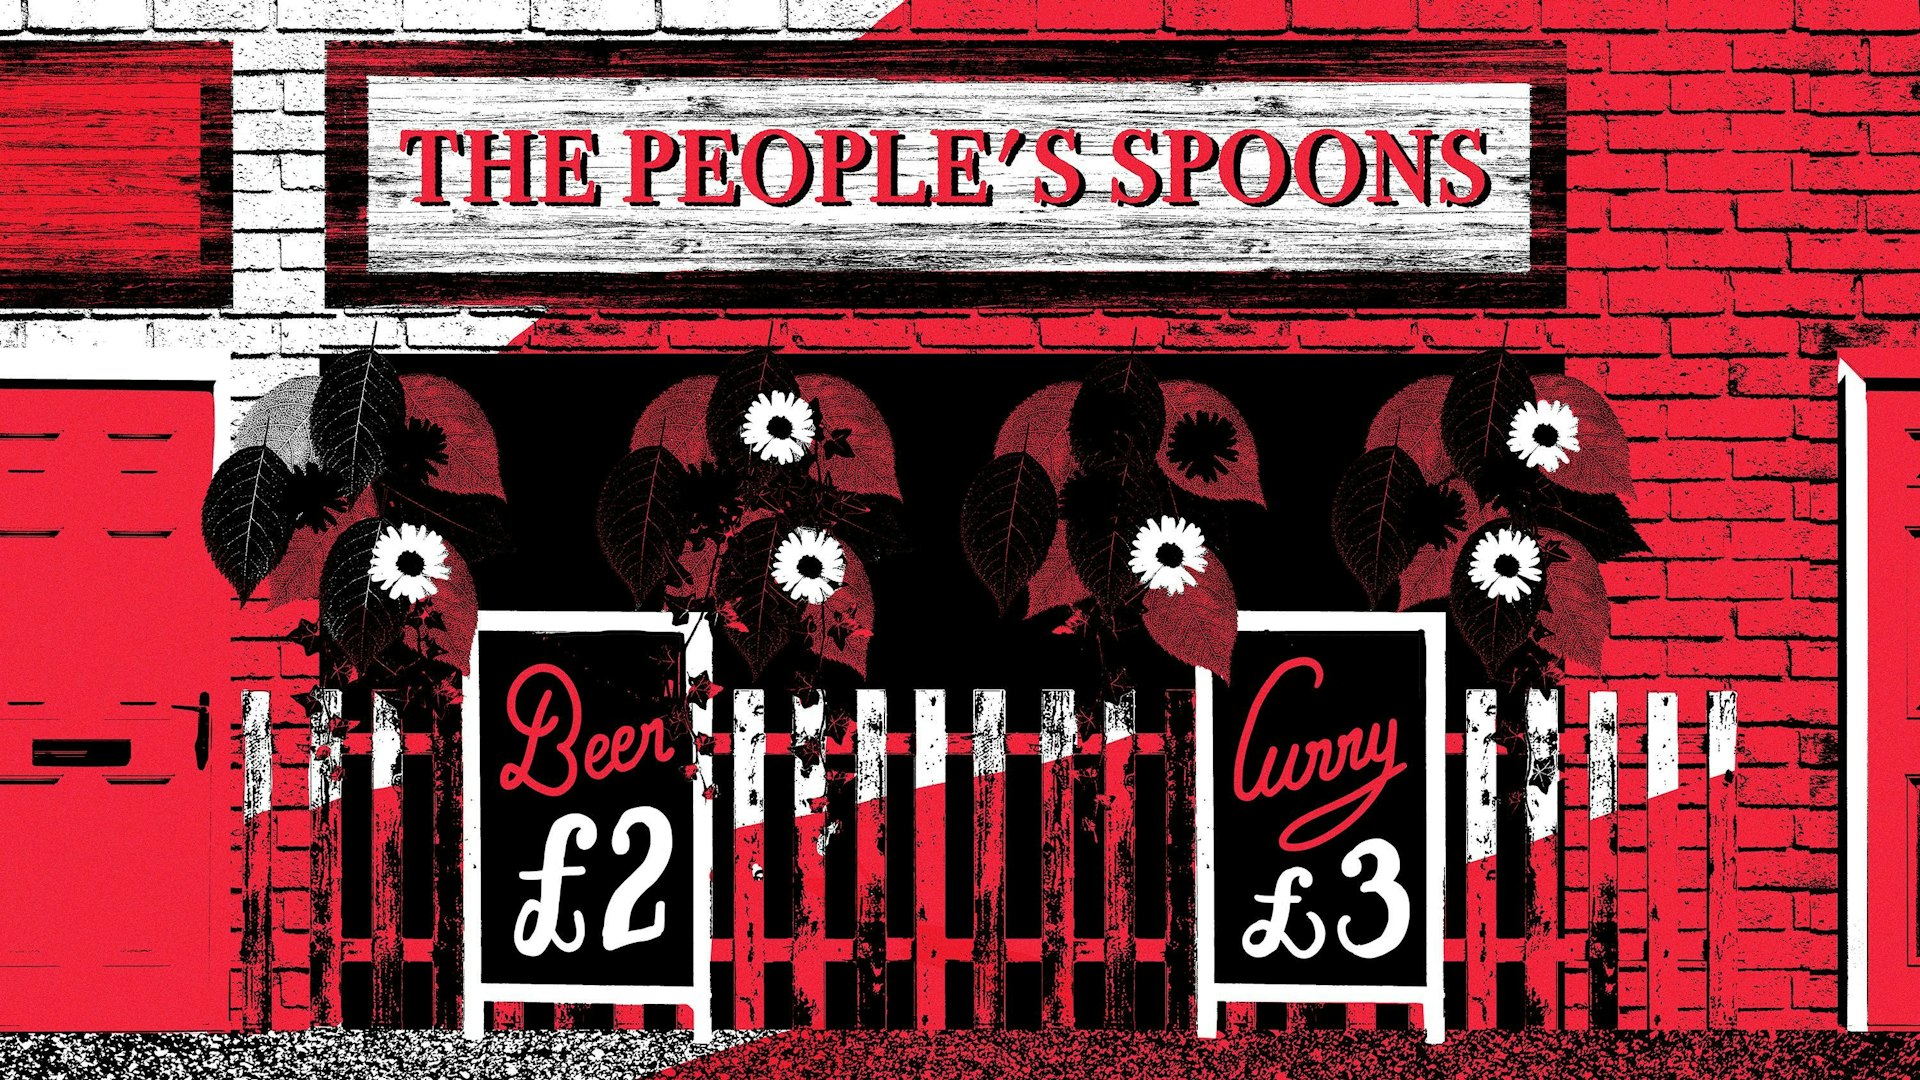 It's time to nationalise Wetherspoons